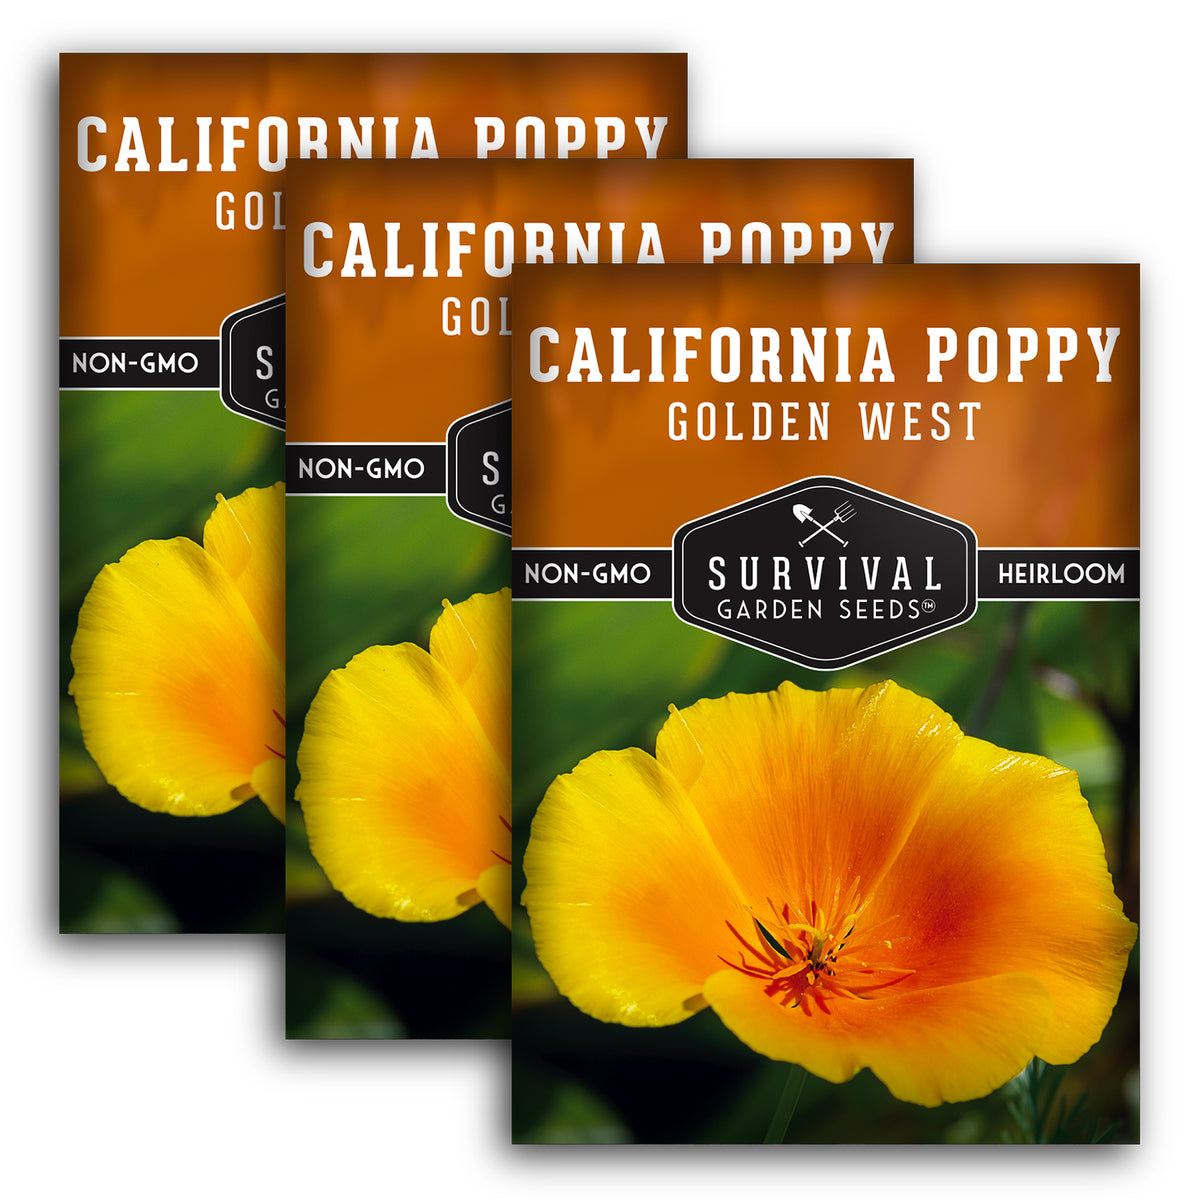 3 Packets of Golden West Poppy Seeds